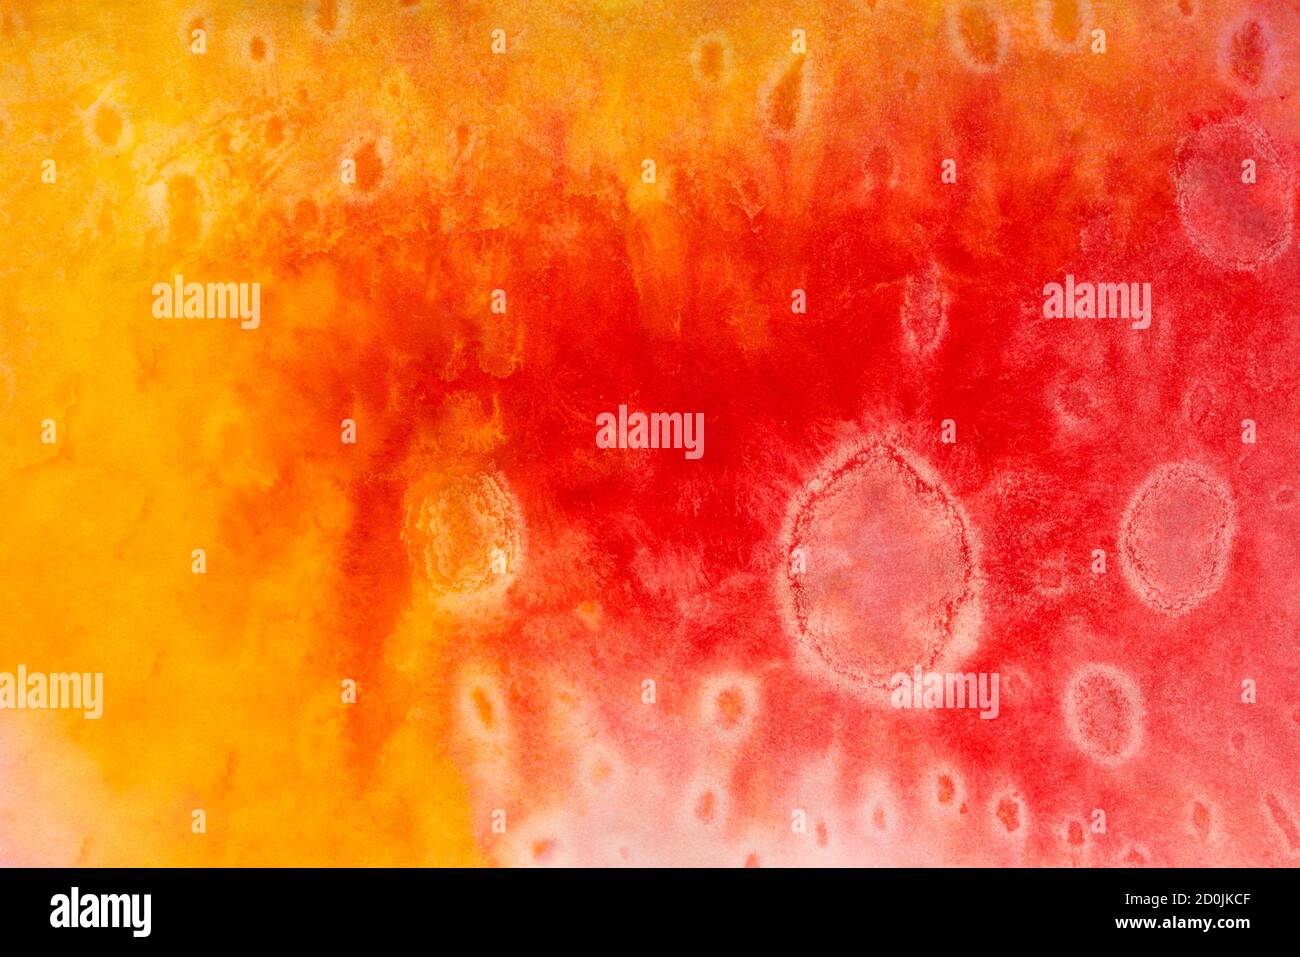 orange color watercolor painted background texture Stock Photo